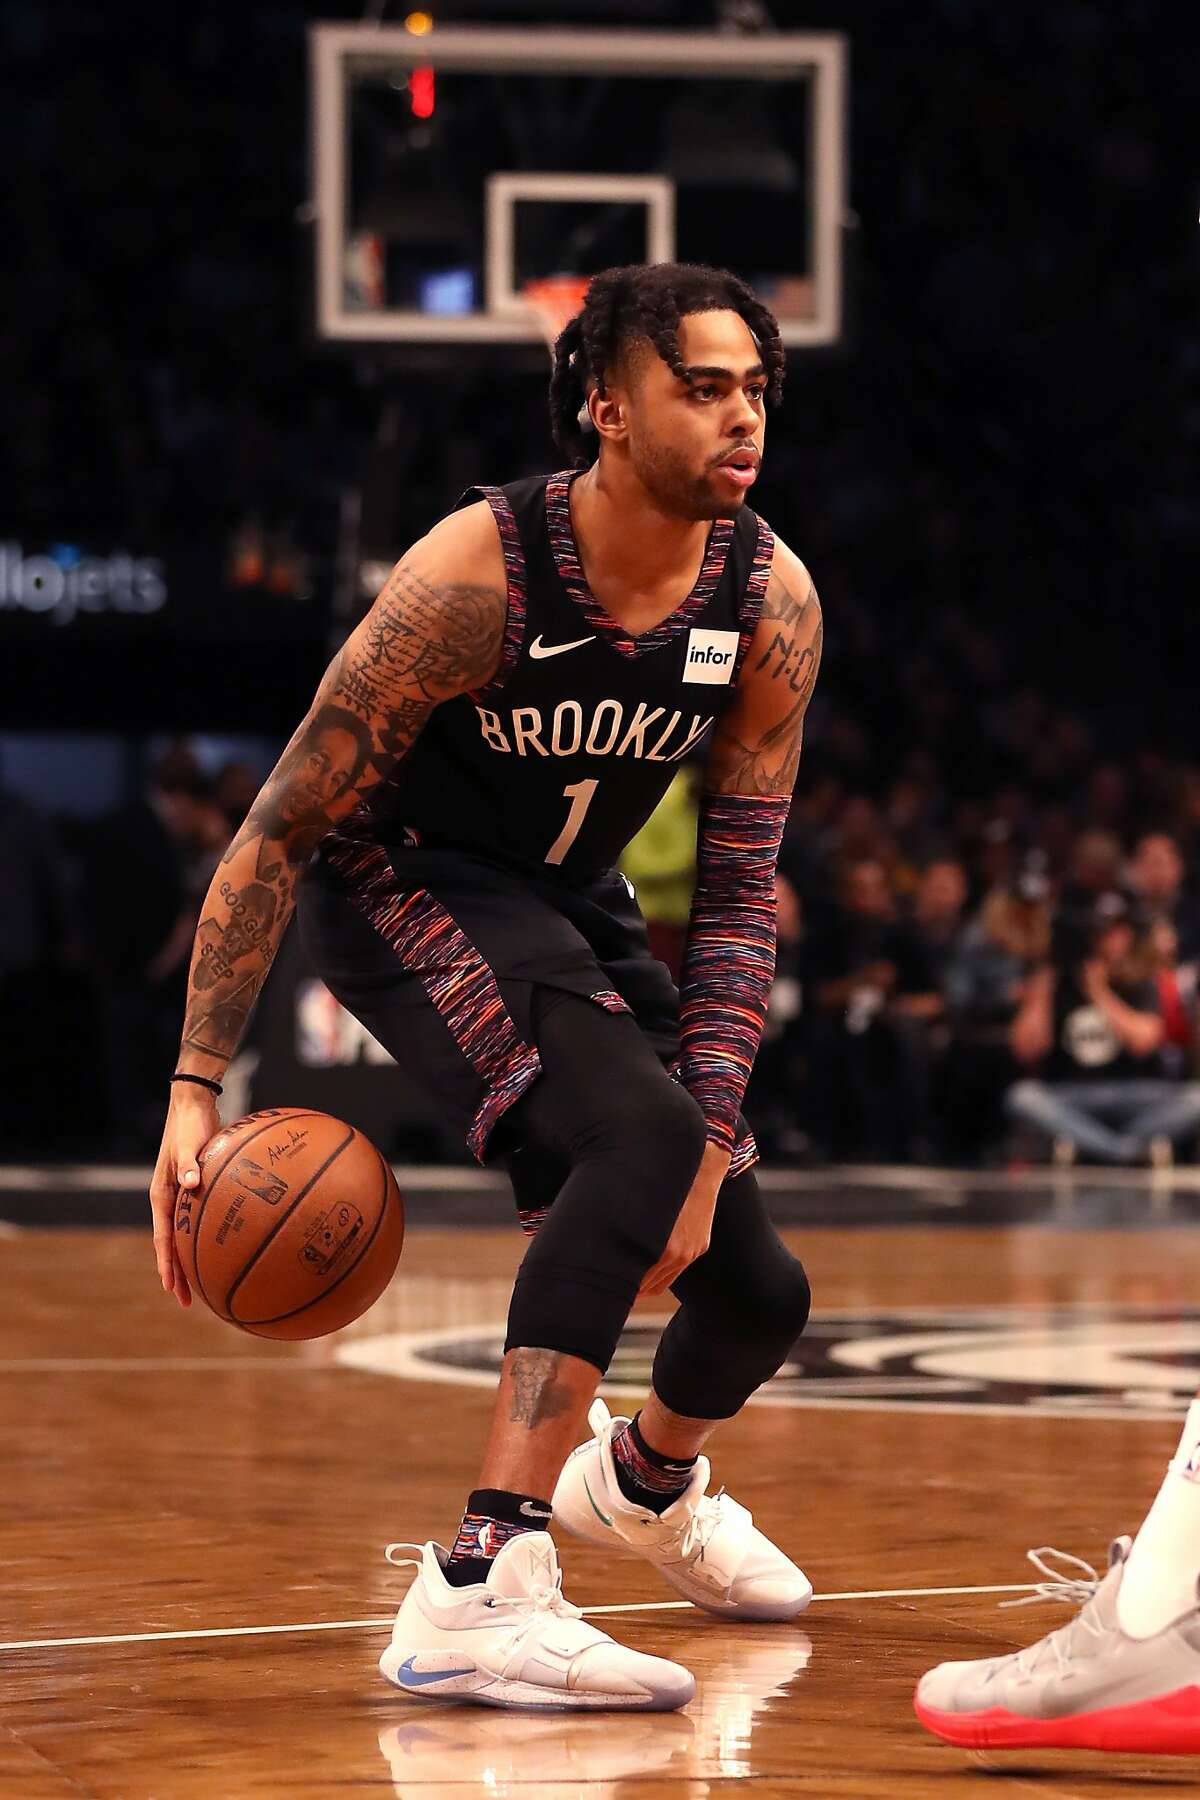 D'Angelo Russell #1 of the Brooklyn Nets handles the ball in the first quarter against the Philadelphia 76ers during game three of Round One of the 2019 NBA Playoffs at Barclays Center on April 18, 2019 in the Brooklyn borough of New York City.